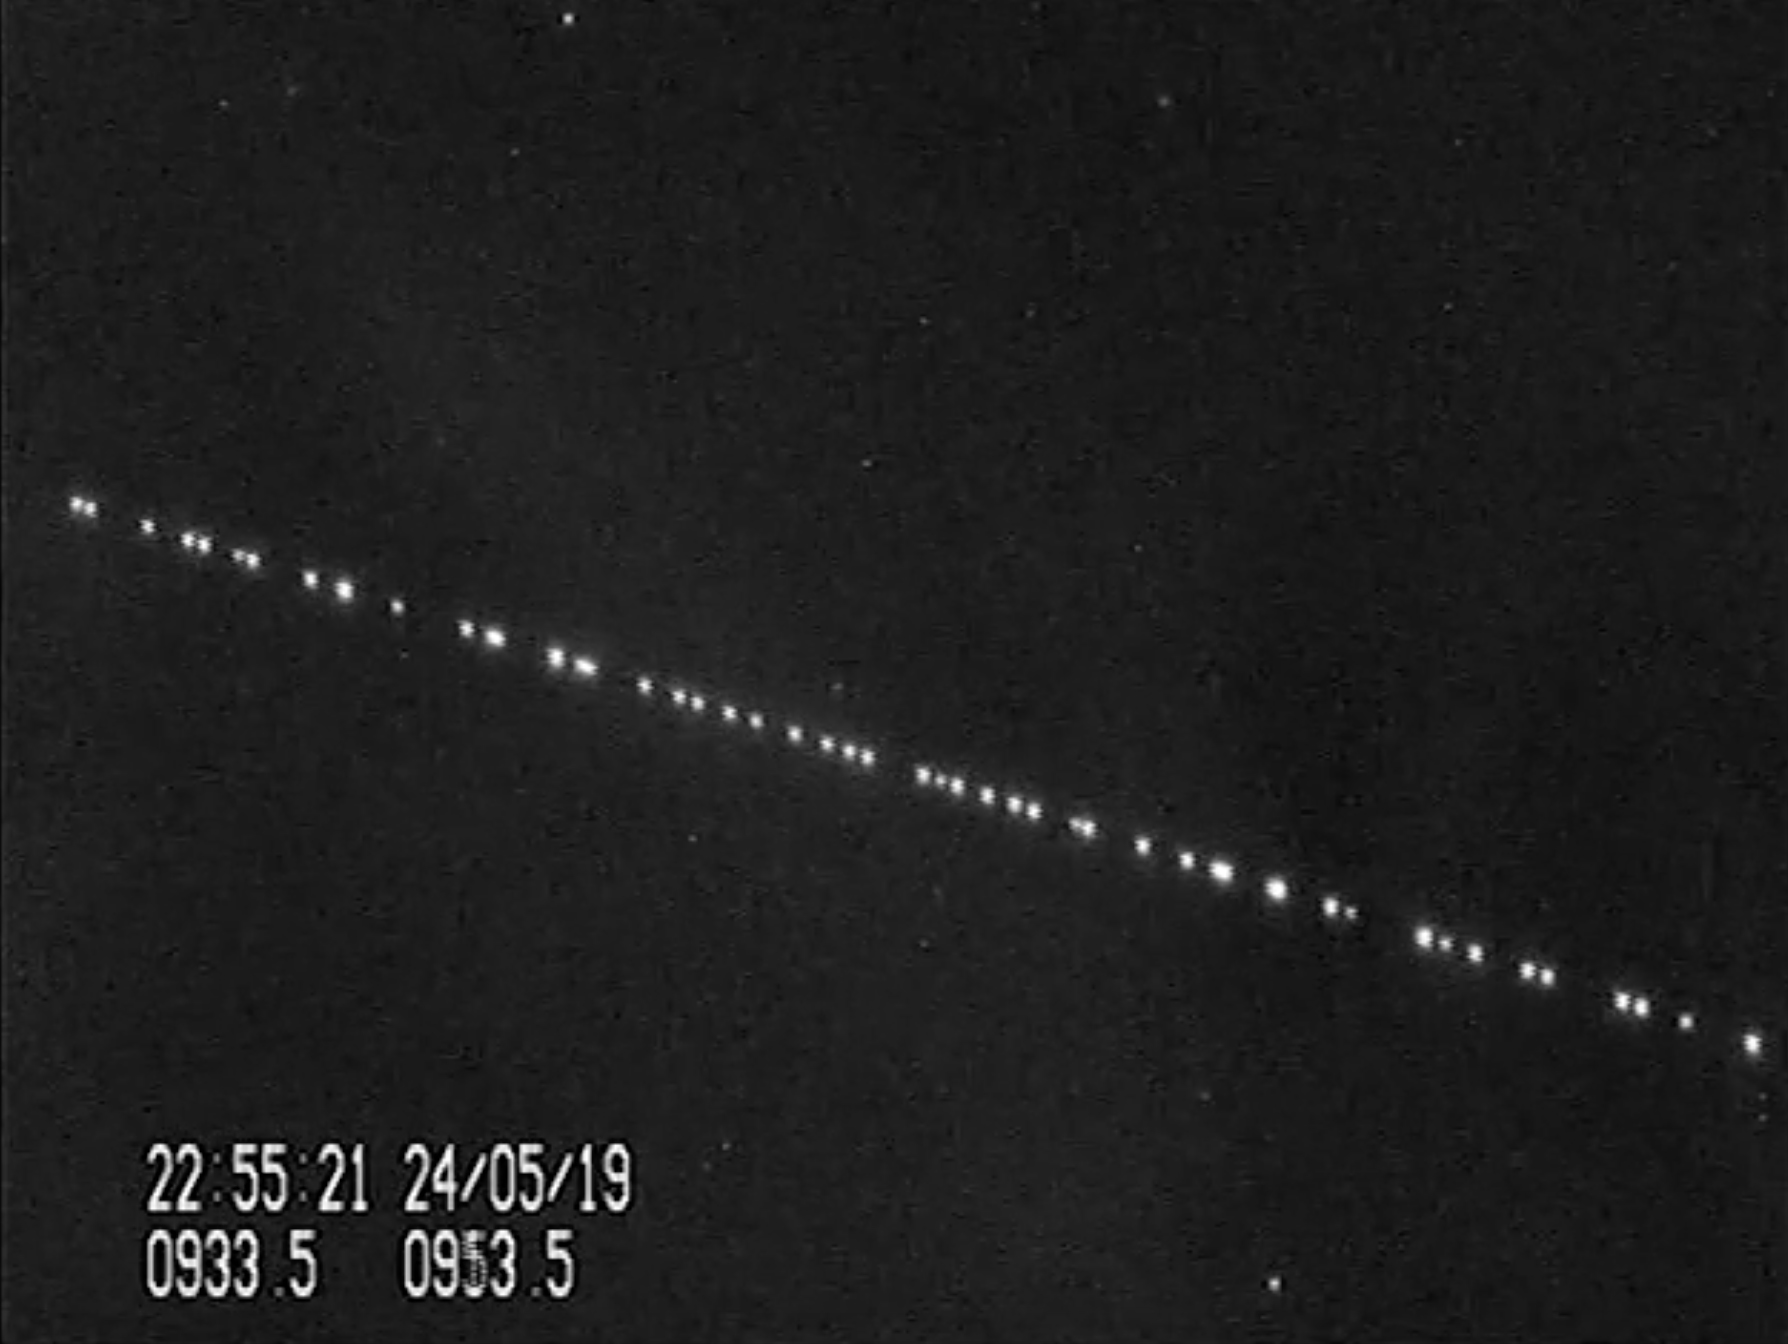 String of Pearls: A train of SpaceX Starlink satellites is seen in the night sky in this still from a video captured by satellite tracker Marco Langbroek in Leiden, the Netherlands on May 24, 2019, just one day after SpaceX launched its first 60-satellite batch of Starlink internet communications satellites into orbit.